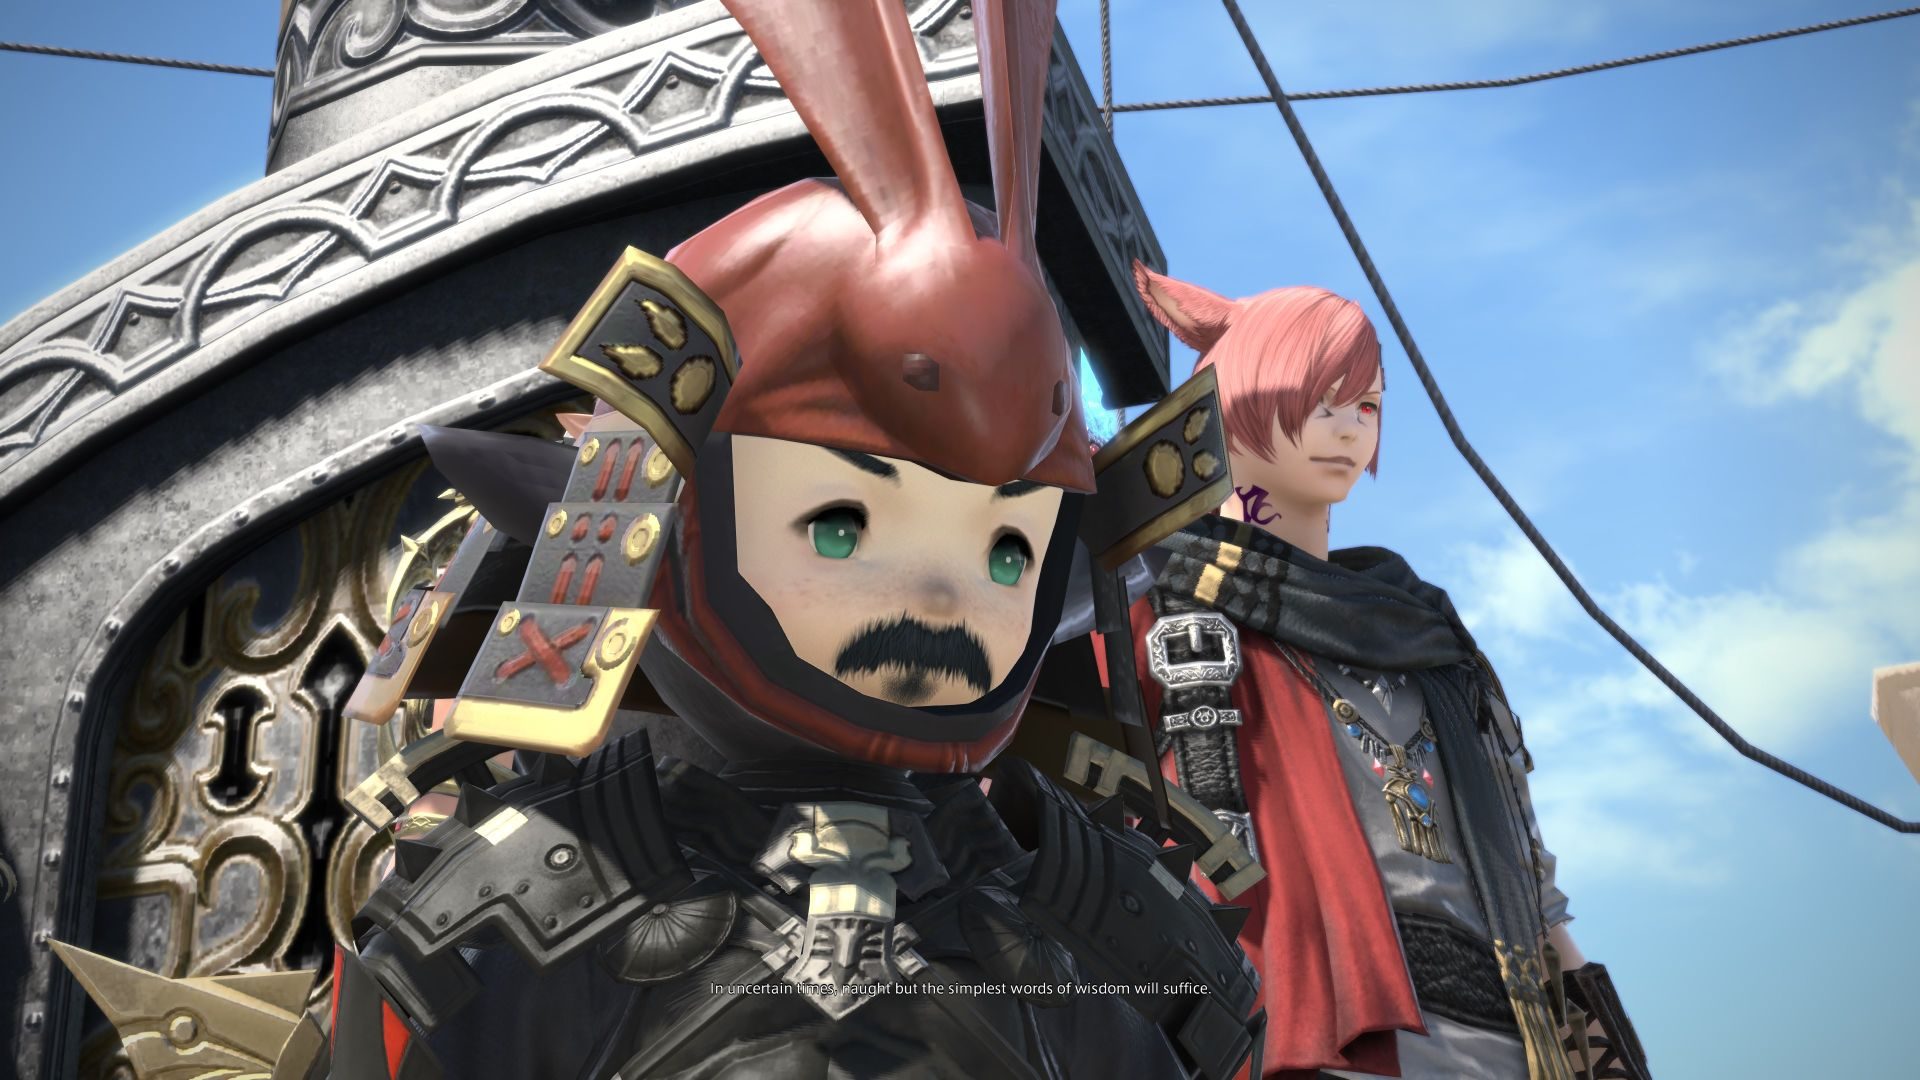 Final Fantasy XIV Breaks Its Steam Concurrent Players Record - Fextralife